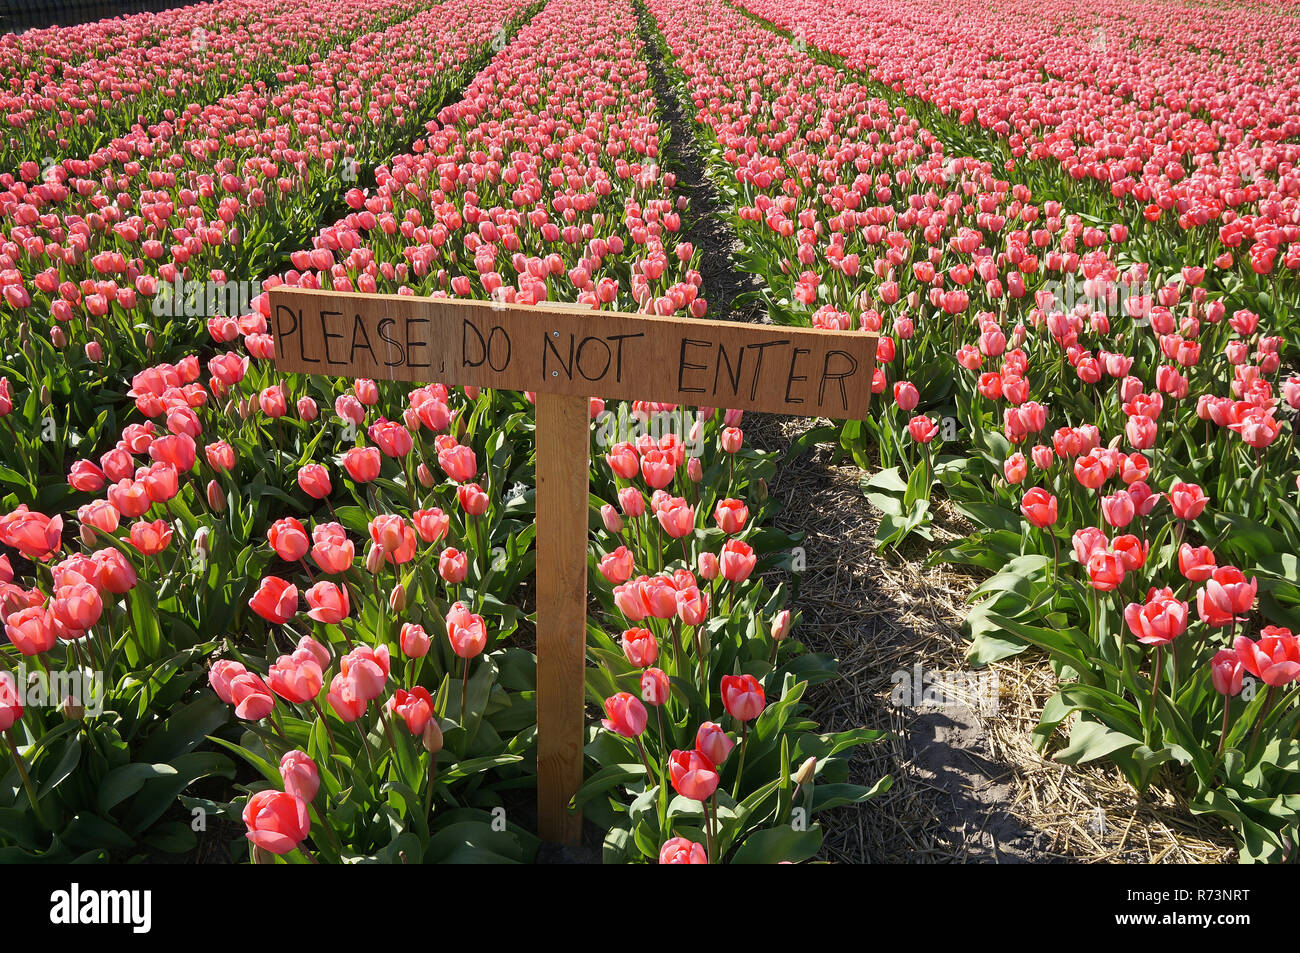 Please do not enter tulip fields, warning sign in bulb field in the Netherlands Stock Photo